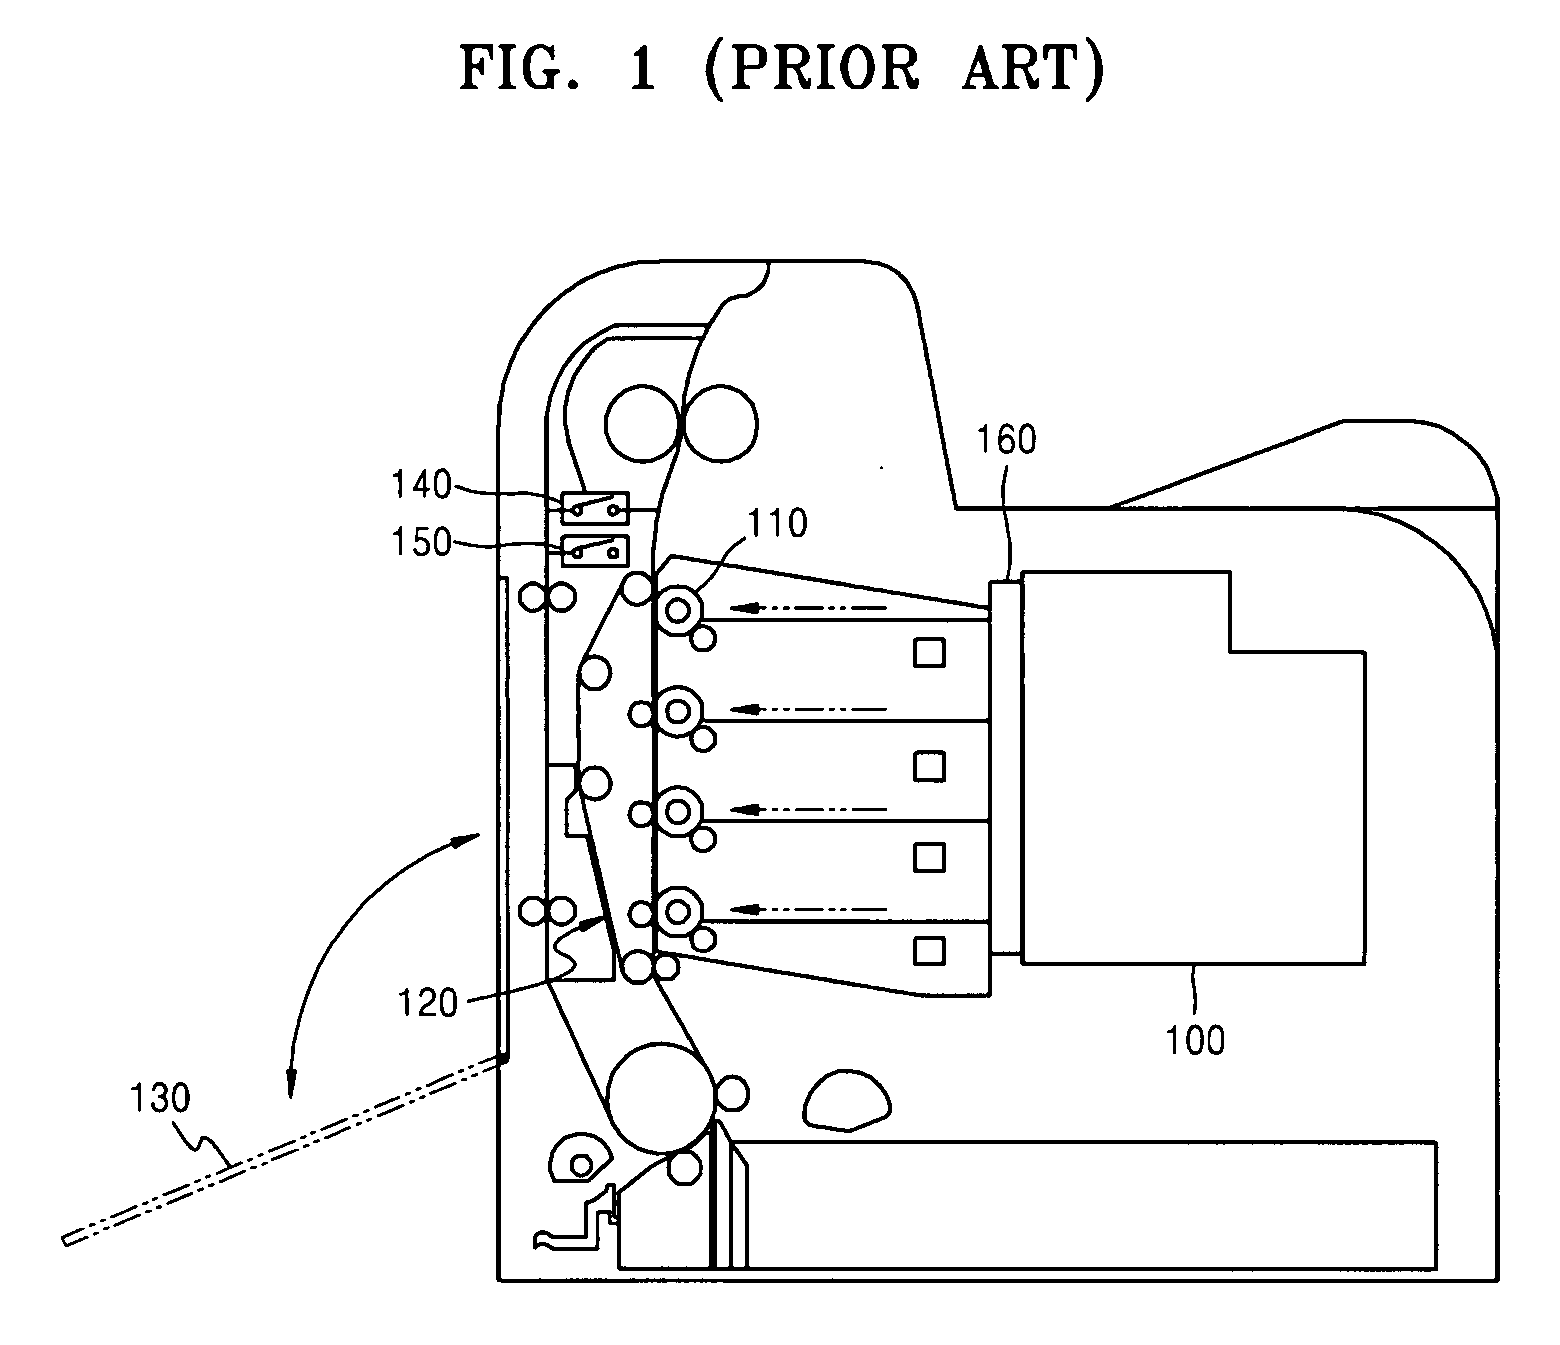 Power control apparatus and method of using a power control apparatus in an image forming device